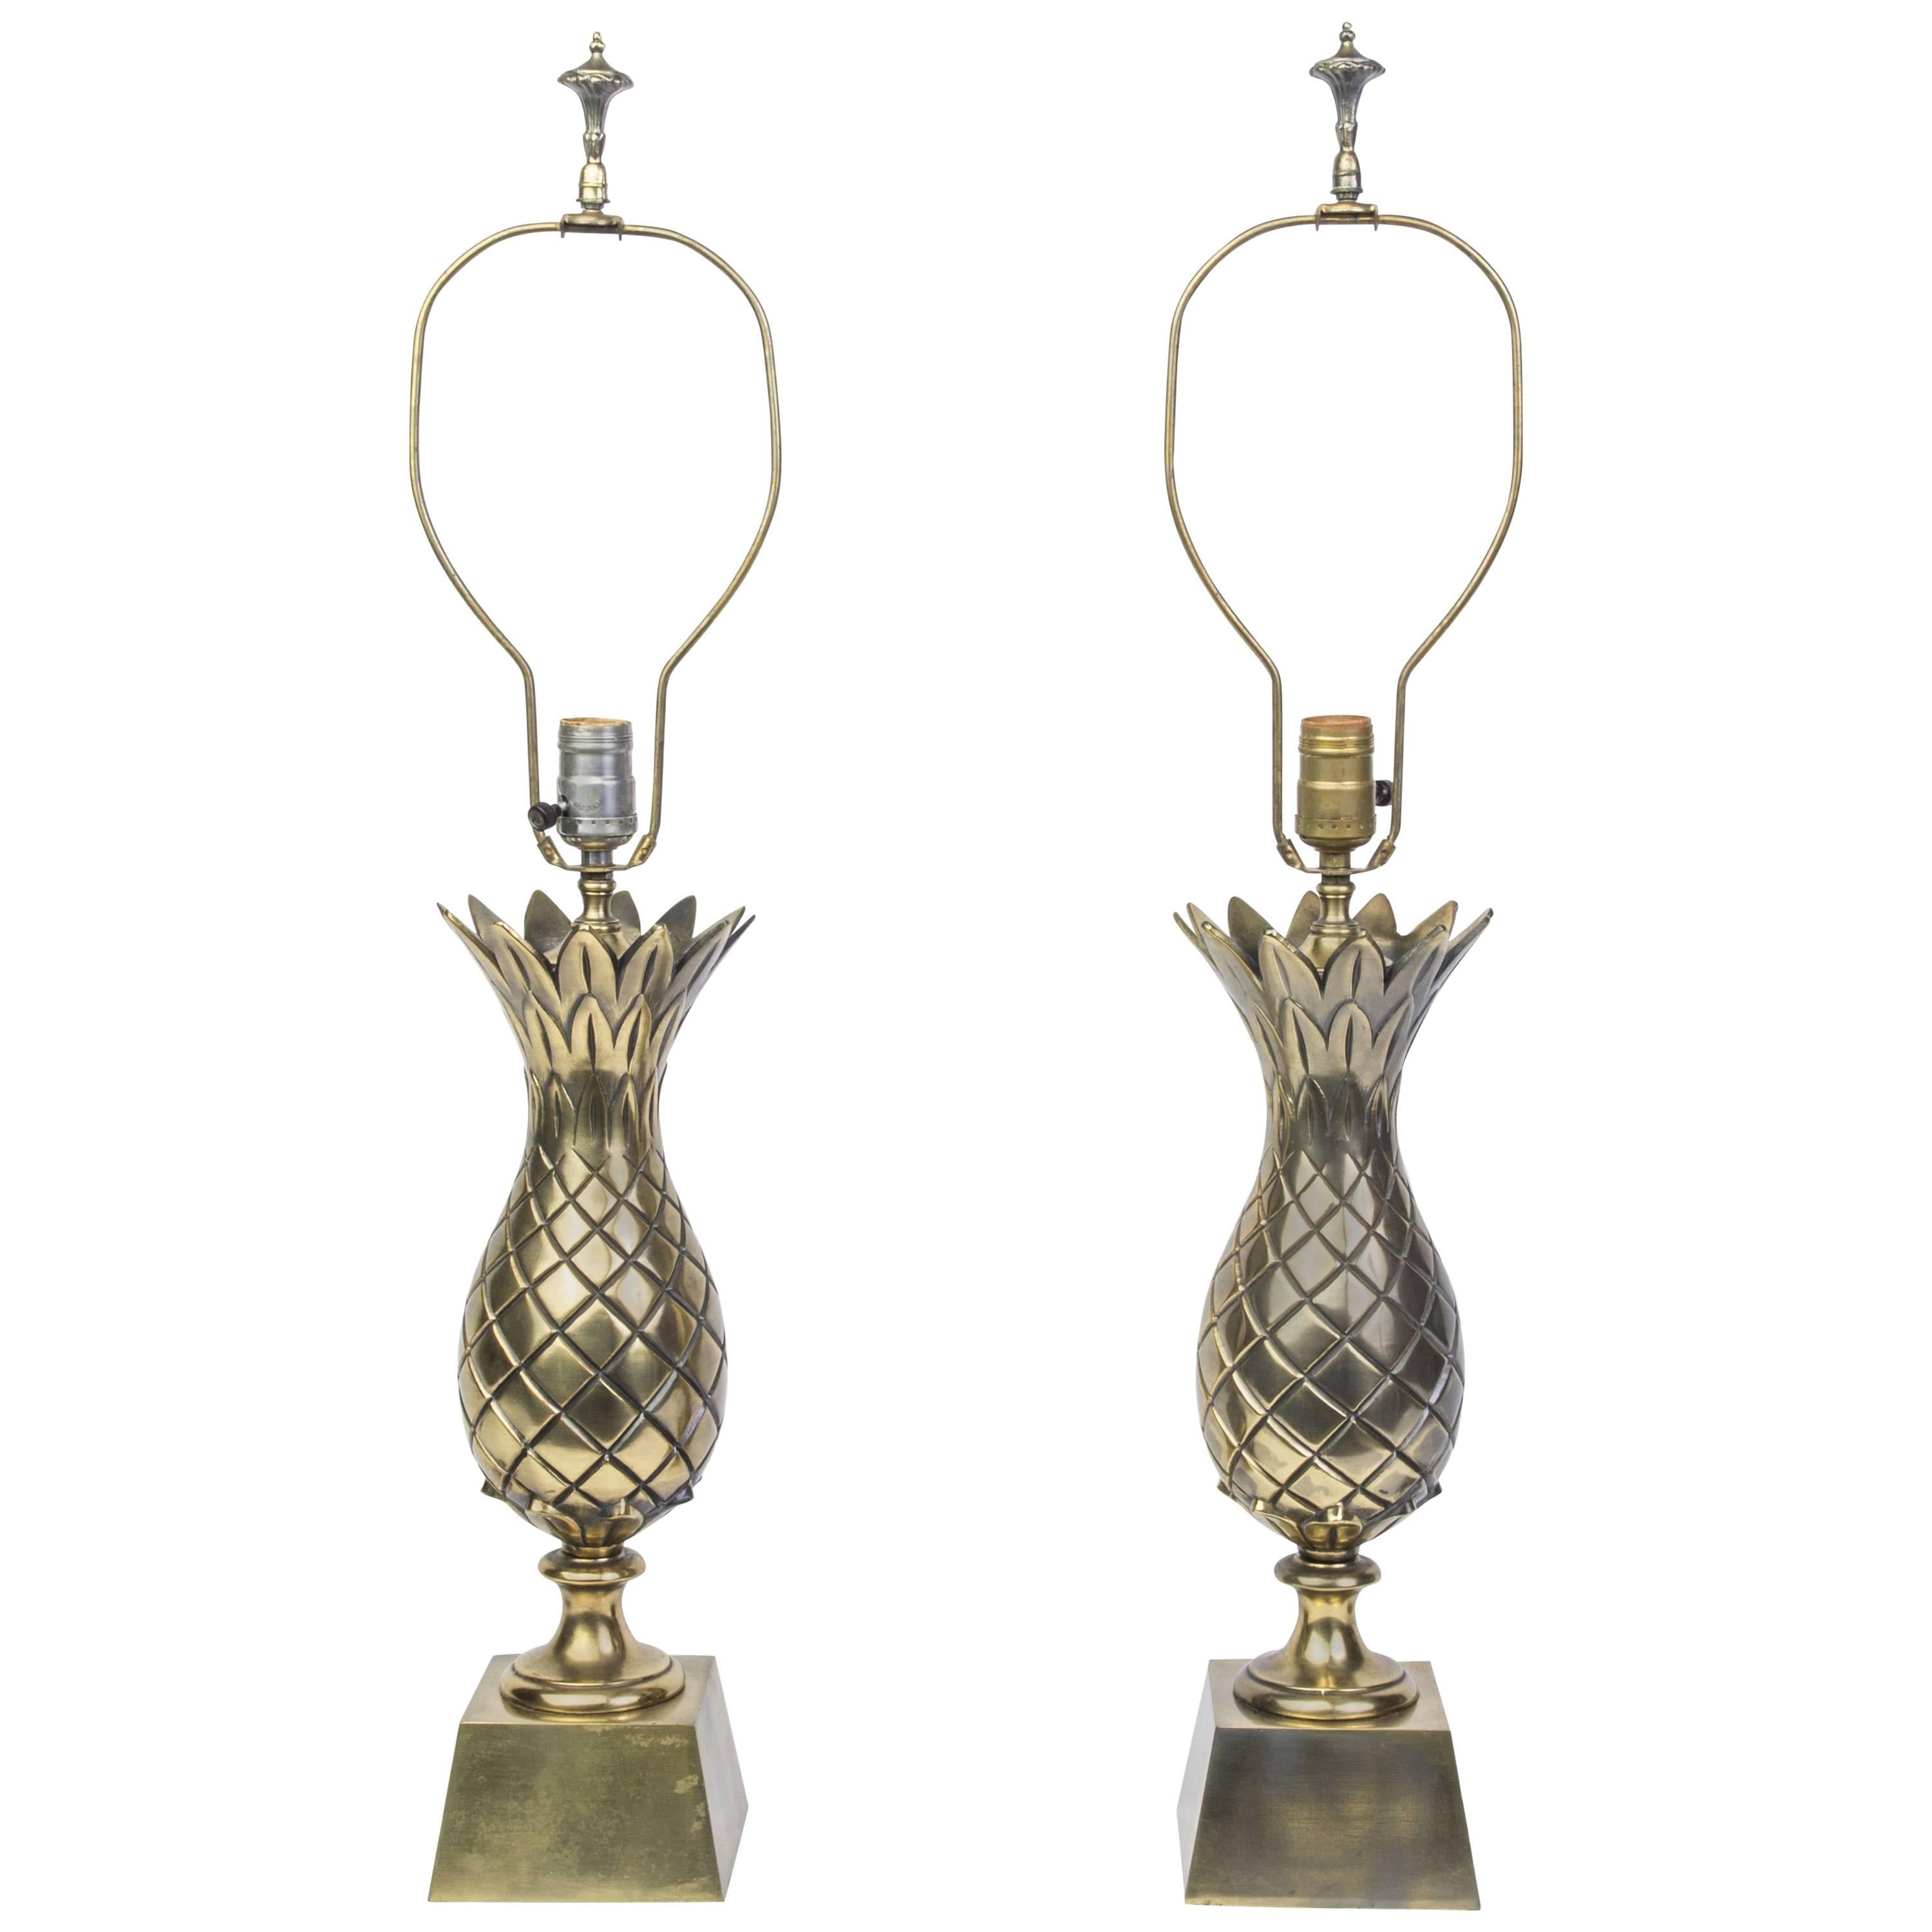 Captivating Pair of Mid-Century Modernist Brass Pineapple Table Lamps